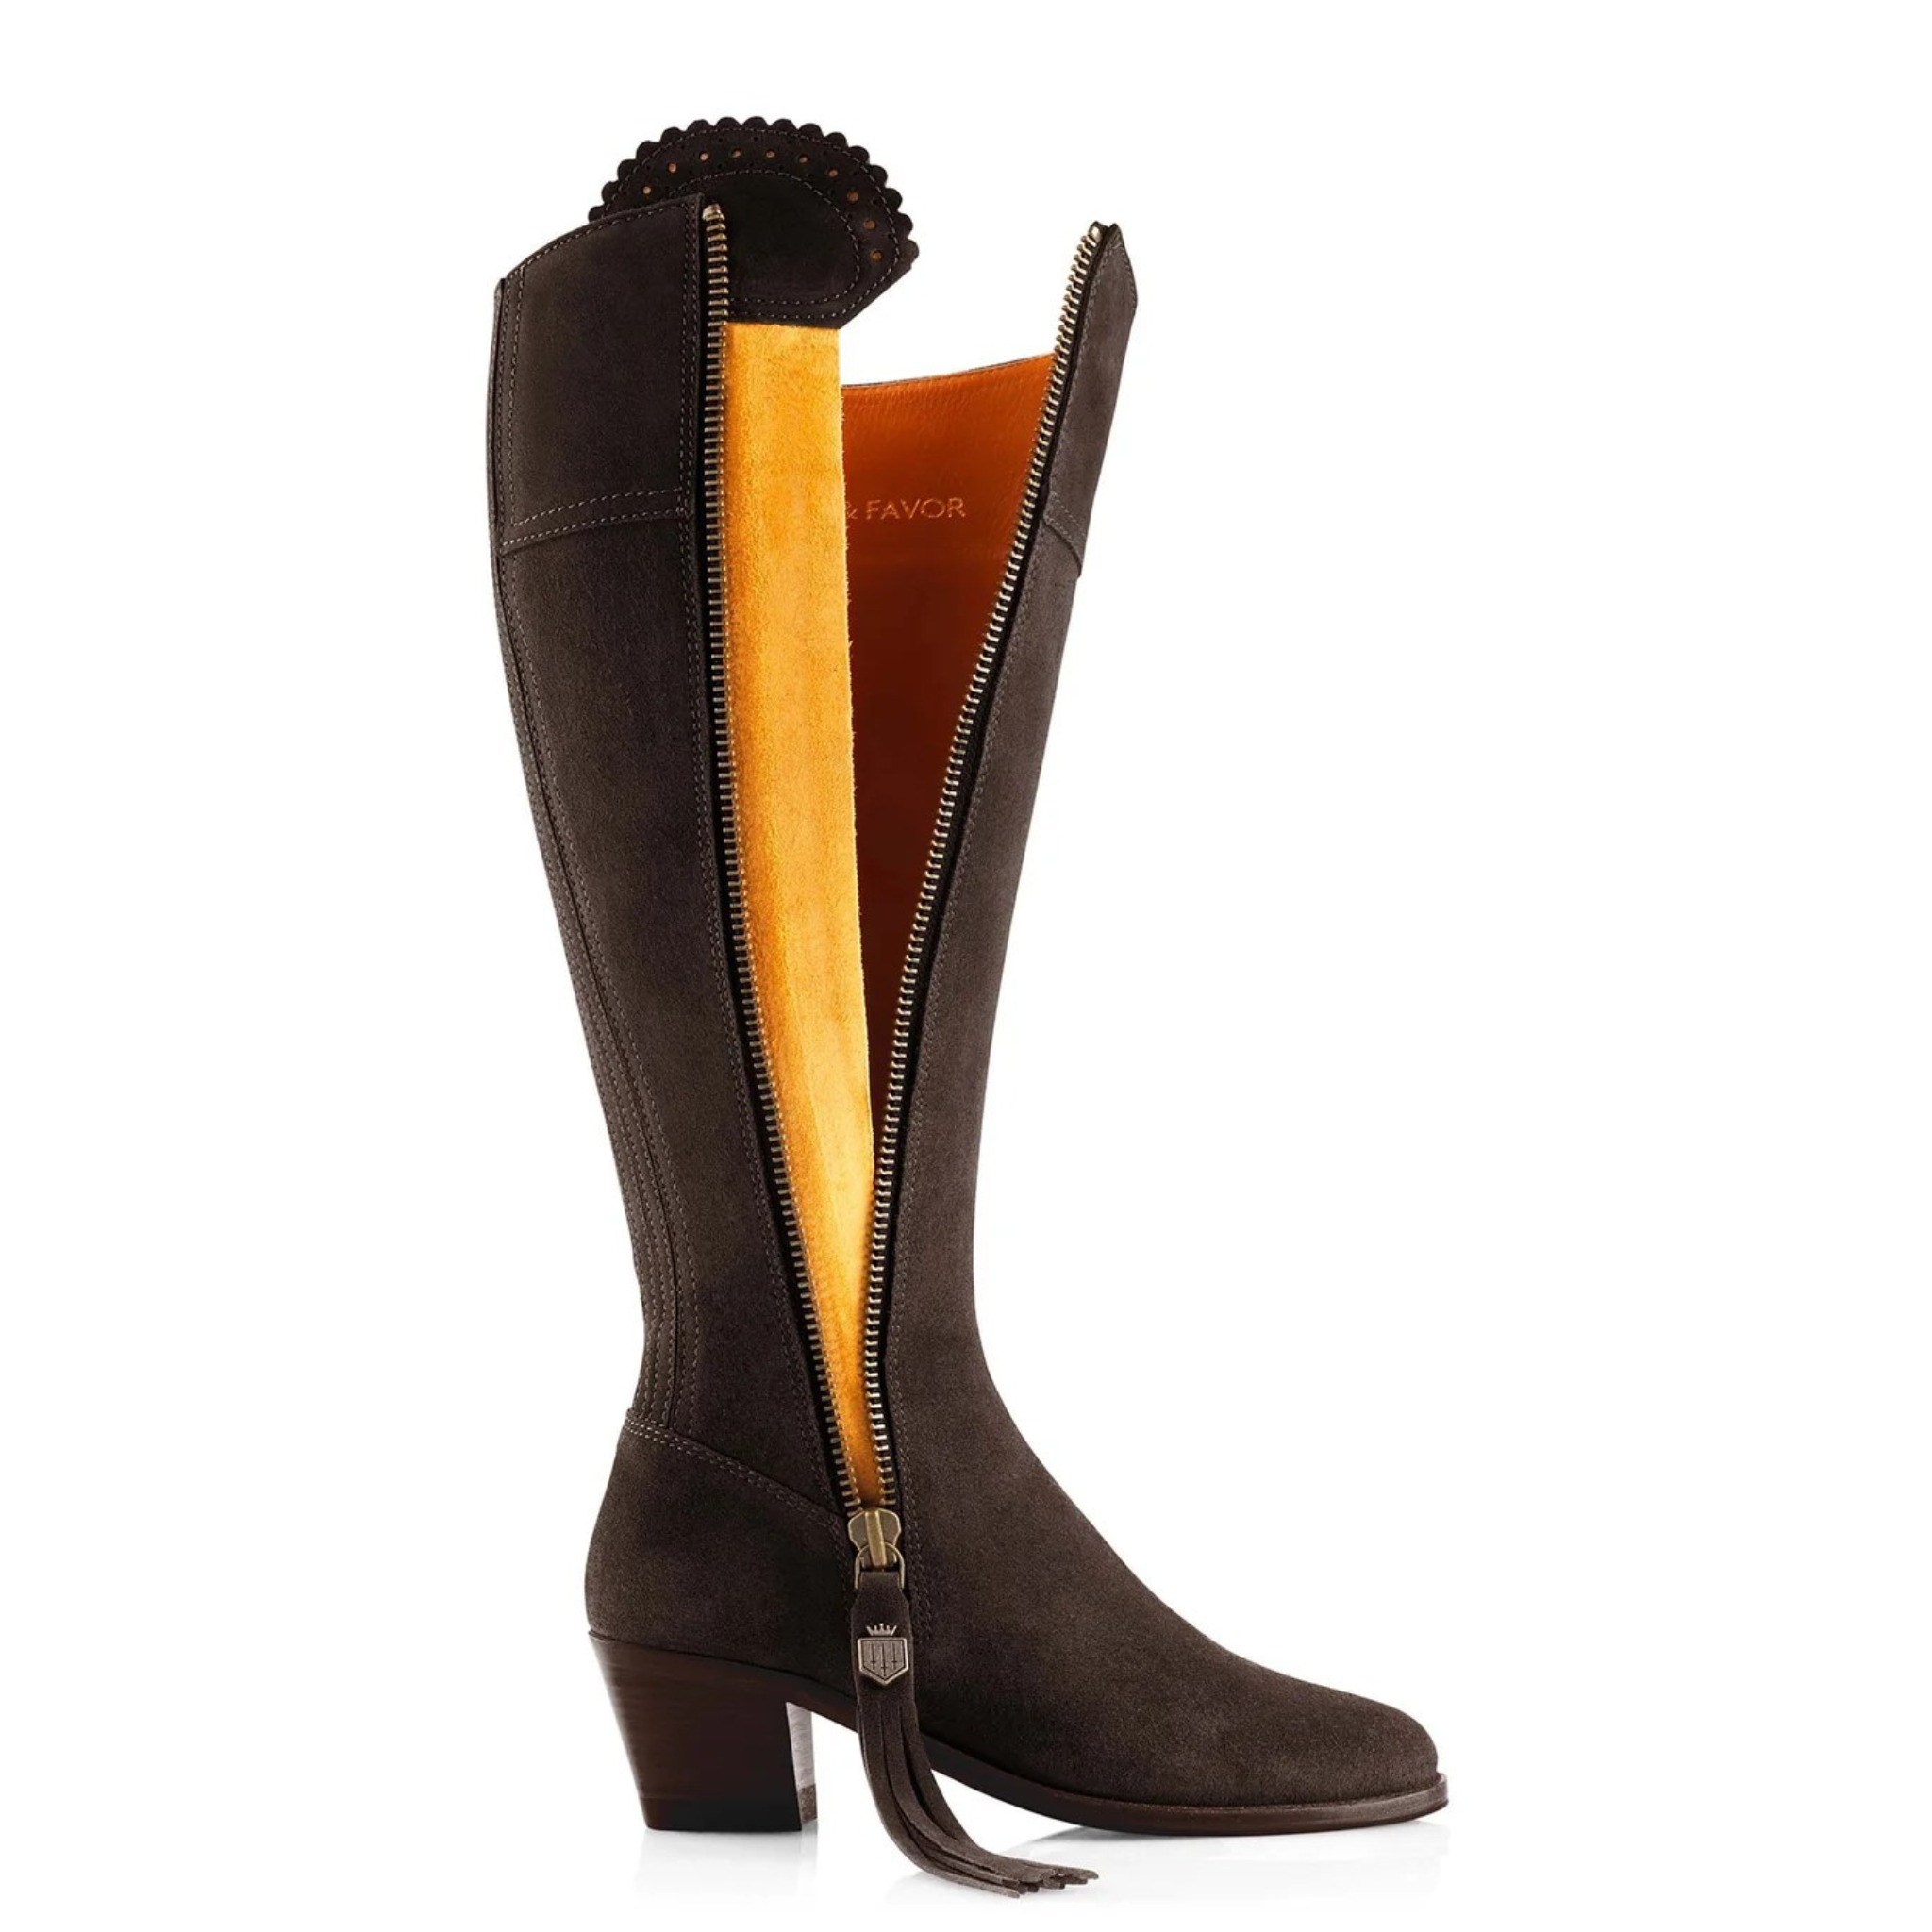 The Heeled Regina Sporting Fit Chocolate Suede